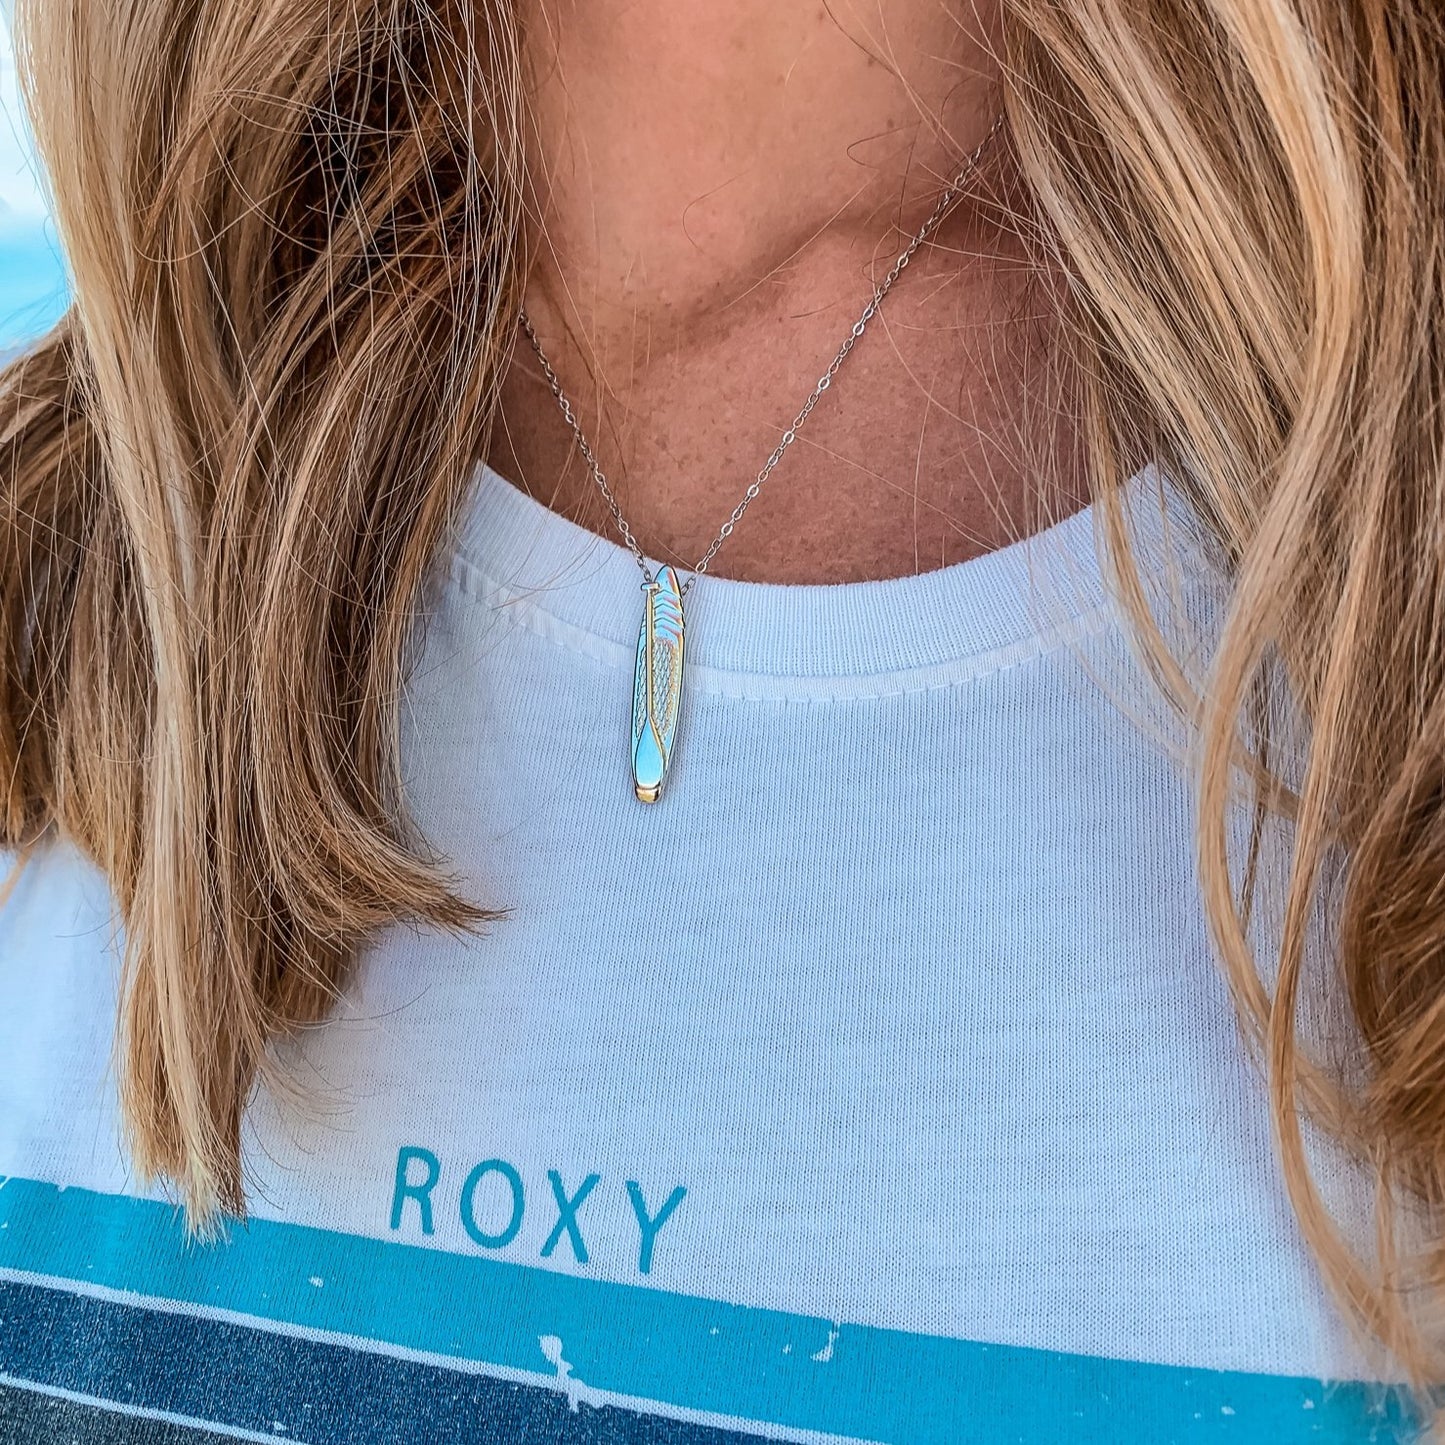 Looking for places to buy or rent a paddle board? This stand up paddle board pendant will be the best and highest performance SUP you'll ever find. Take your paddle board with you, even when you're not surfing, racing or touring. Shop SUP jewelry online or at a surf shop near you.